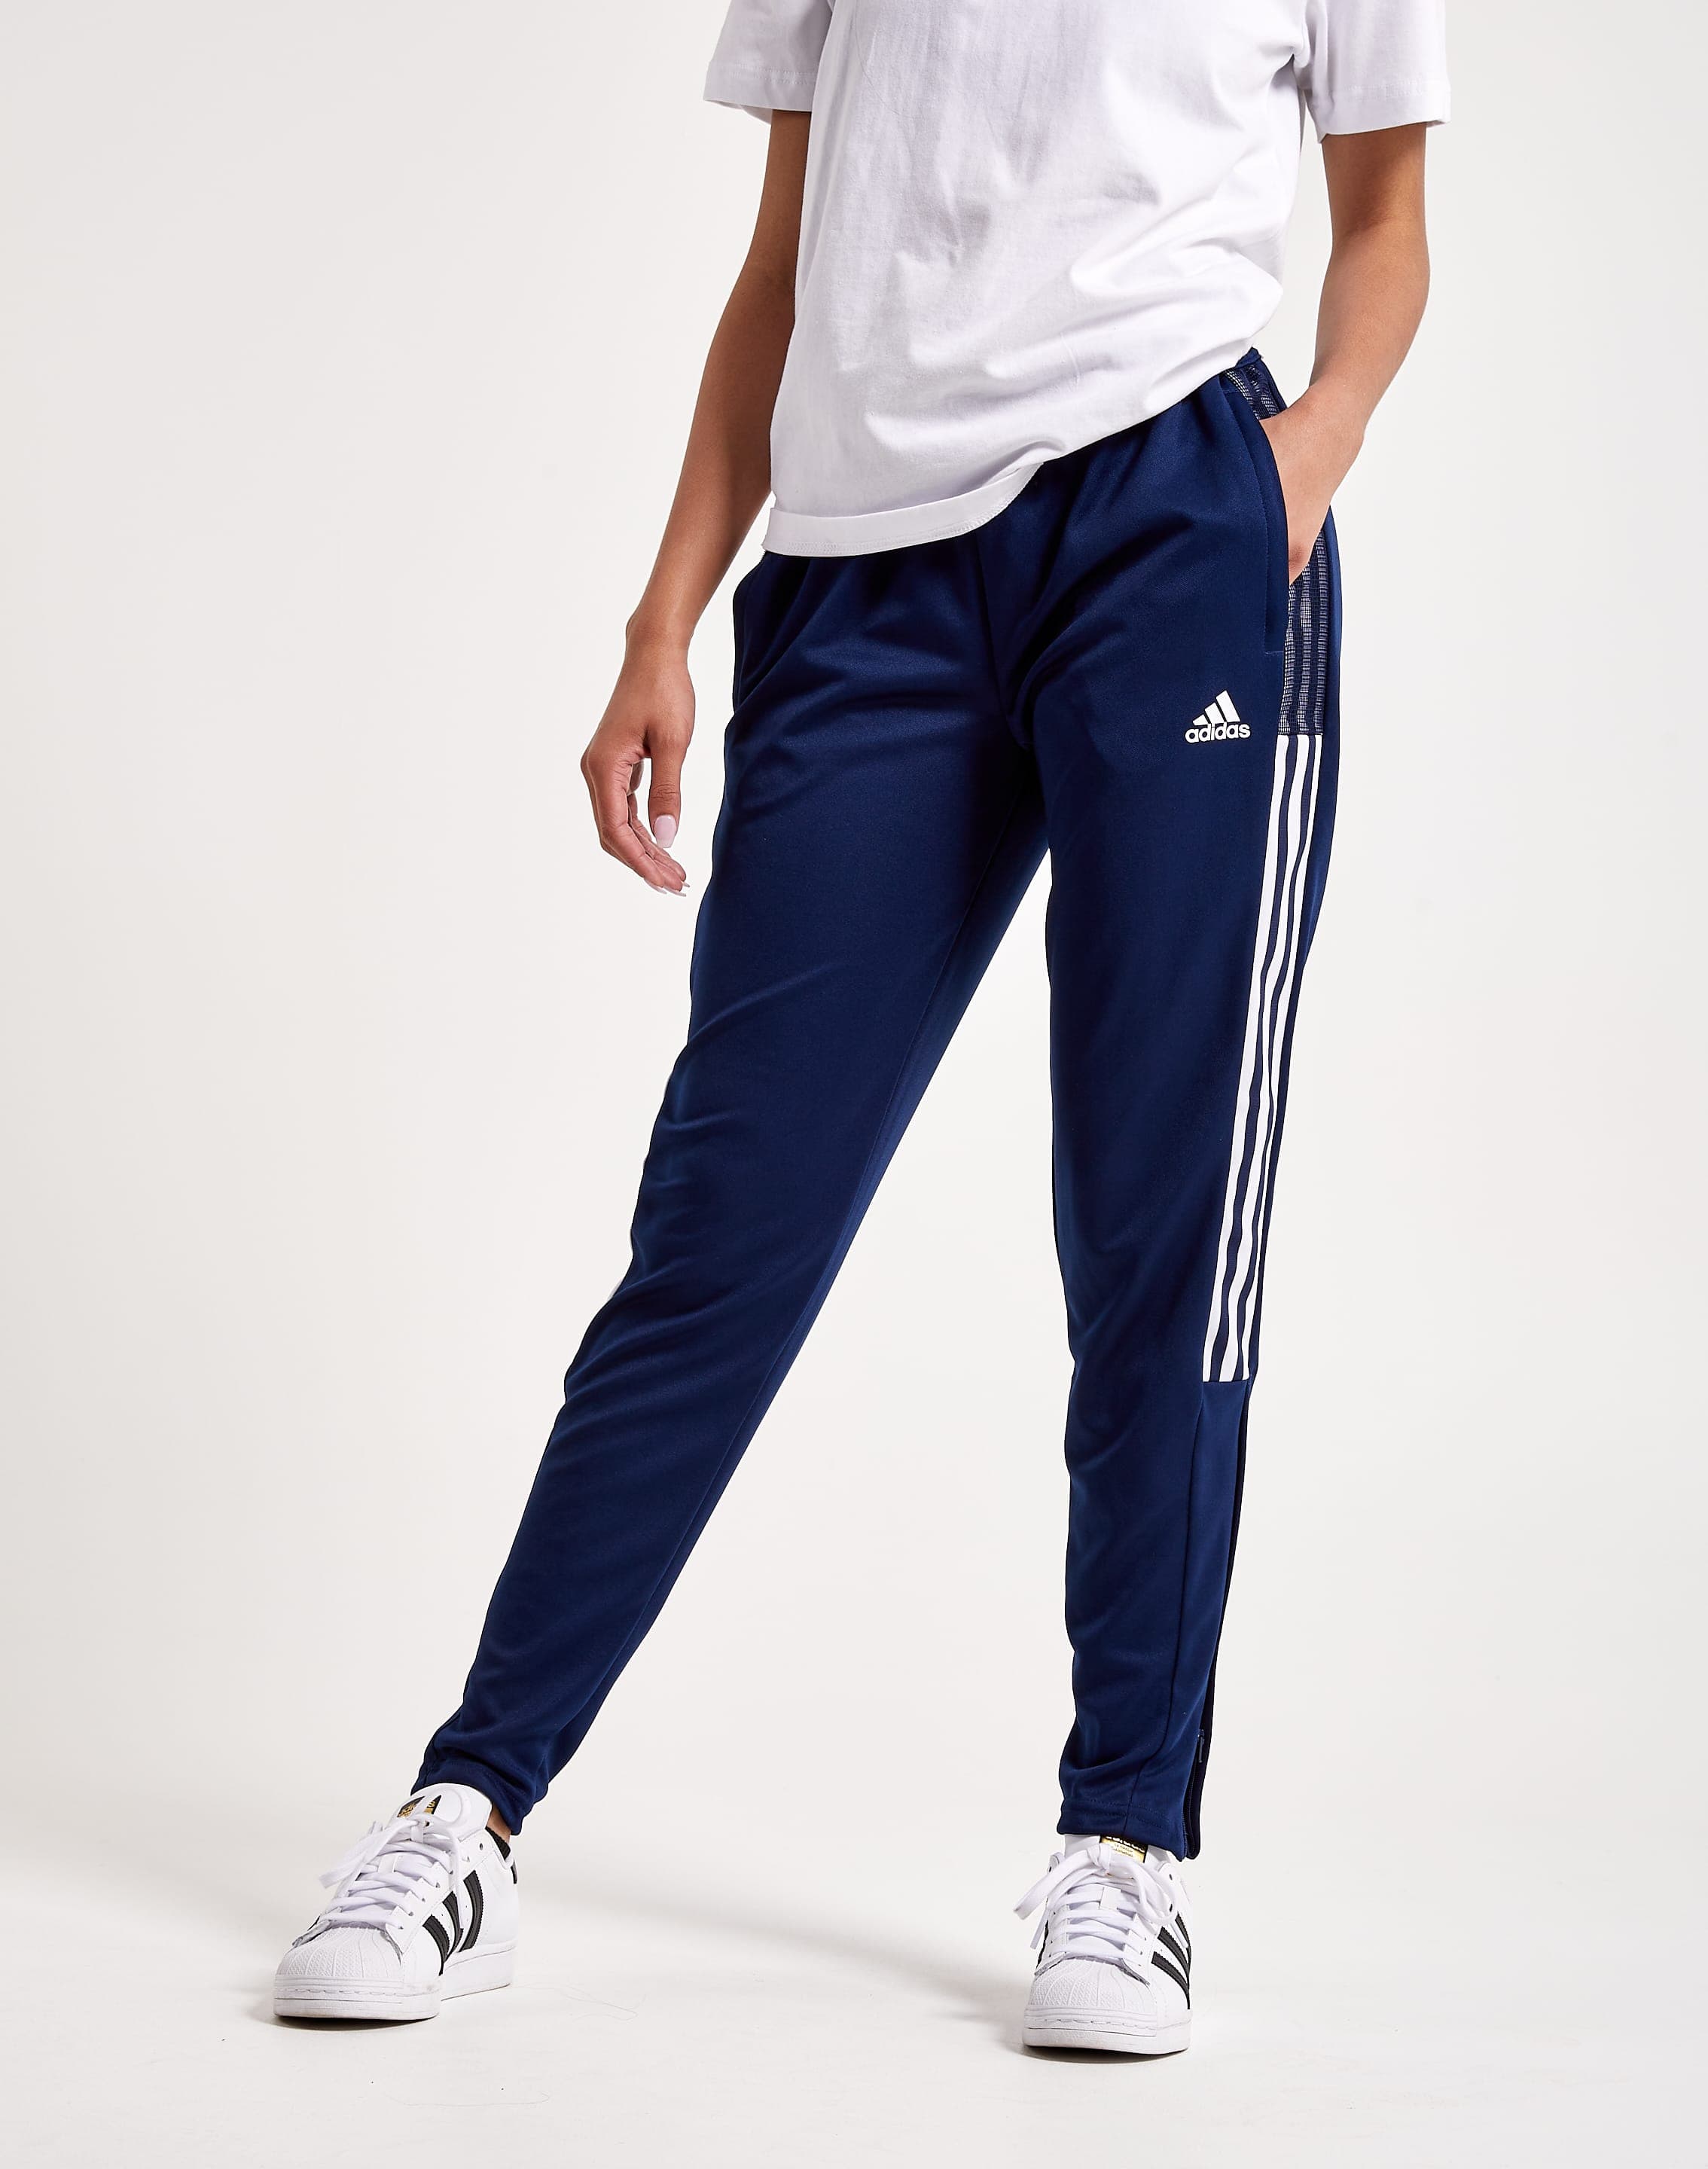 3 ways to style adidas track pants | Track pants outfit, Adidas track pants  outfit, Adidas pants outfit